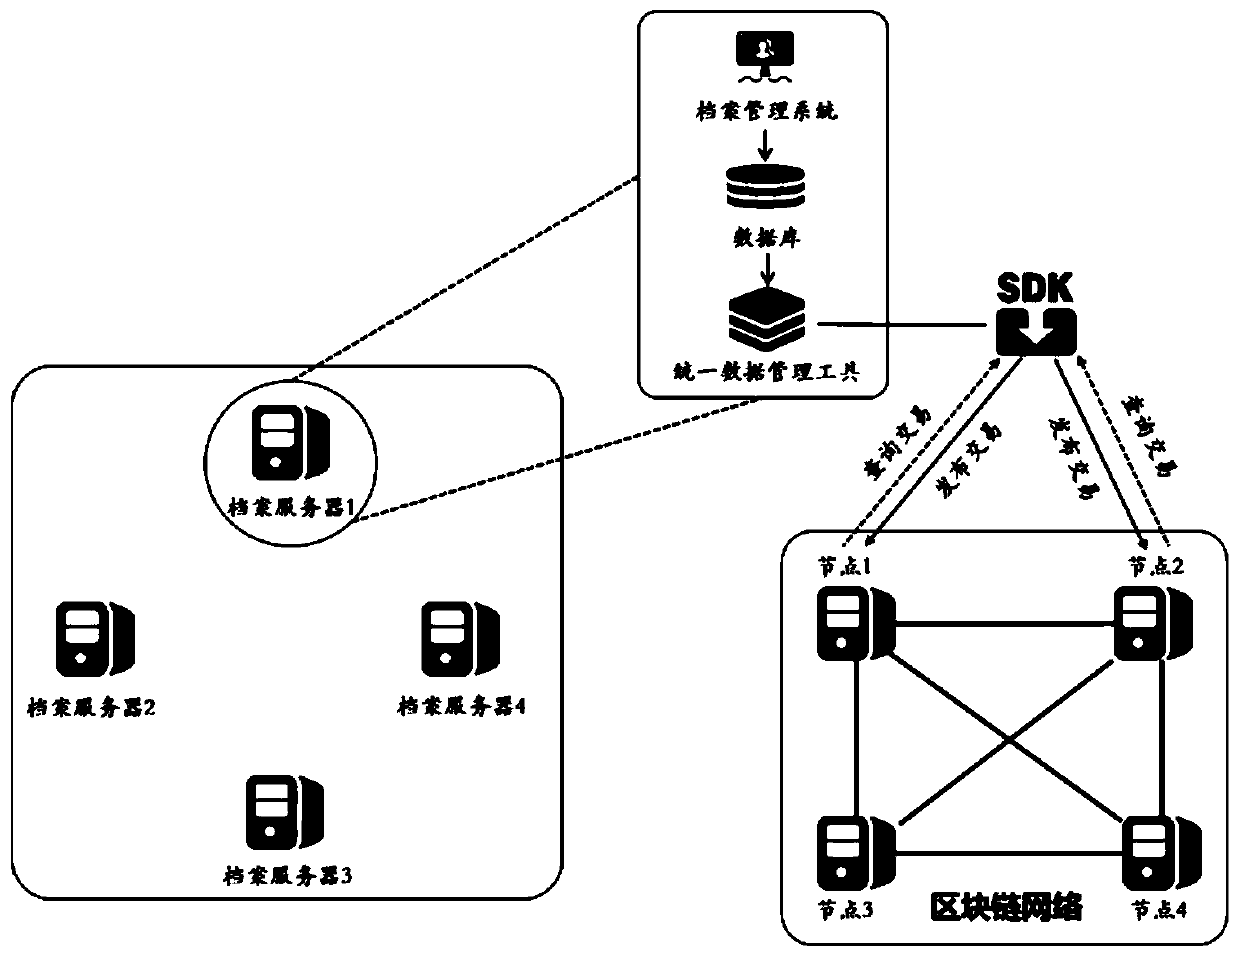 Archive information security management system and method based on blockchain